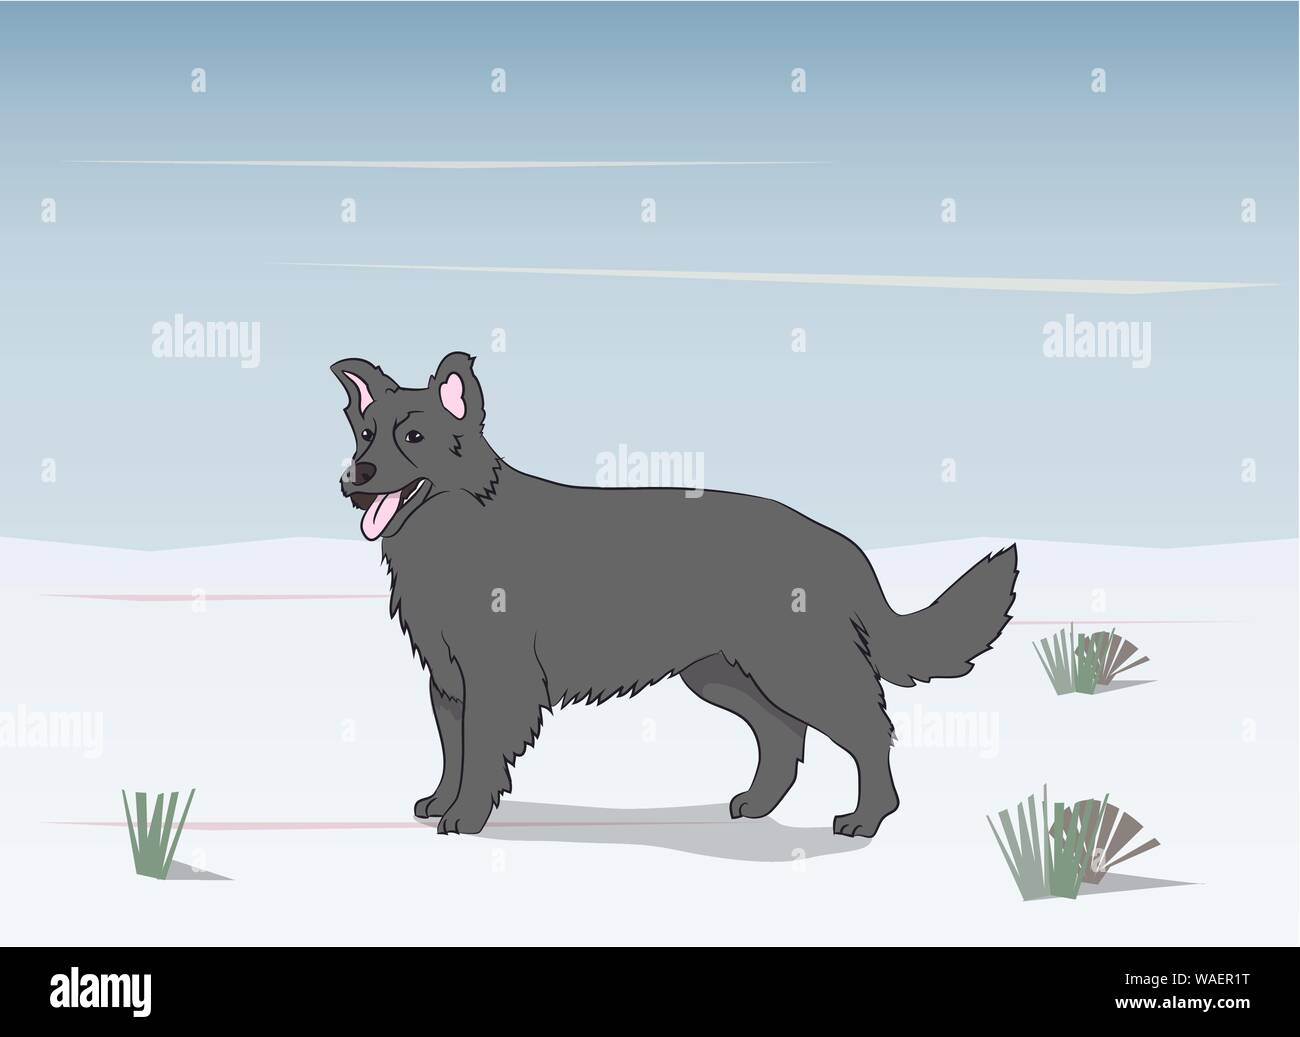 Children and wolf Stock Vector Images - Alamy